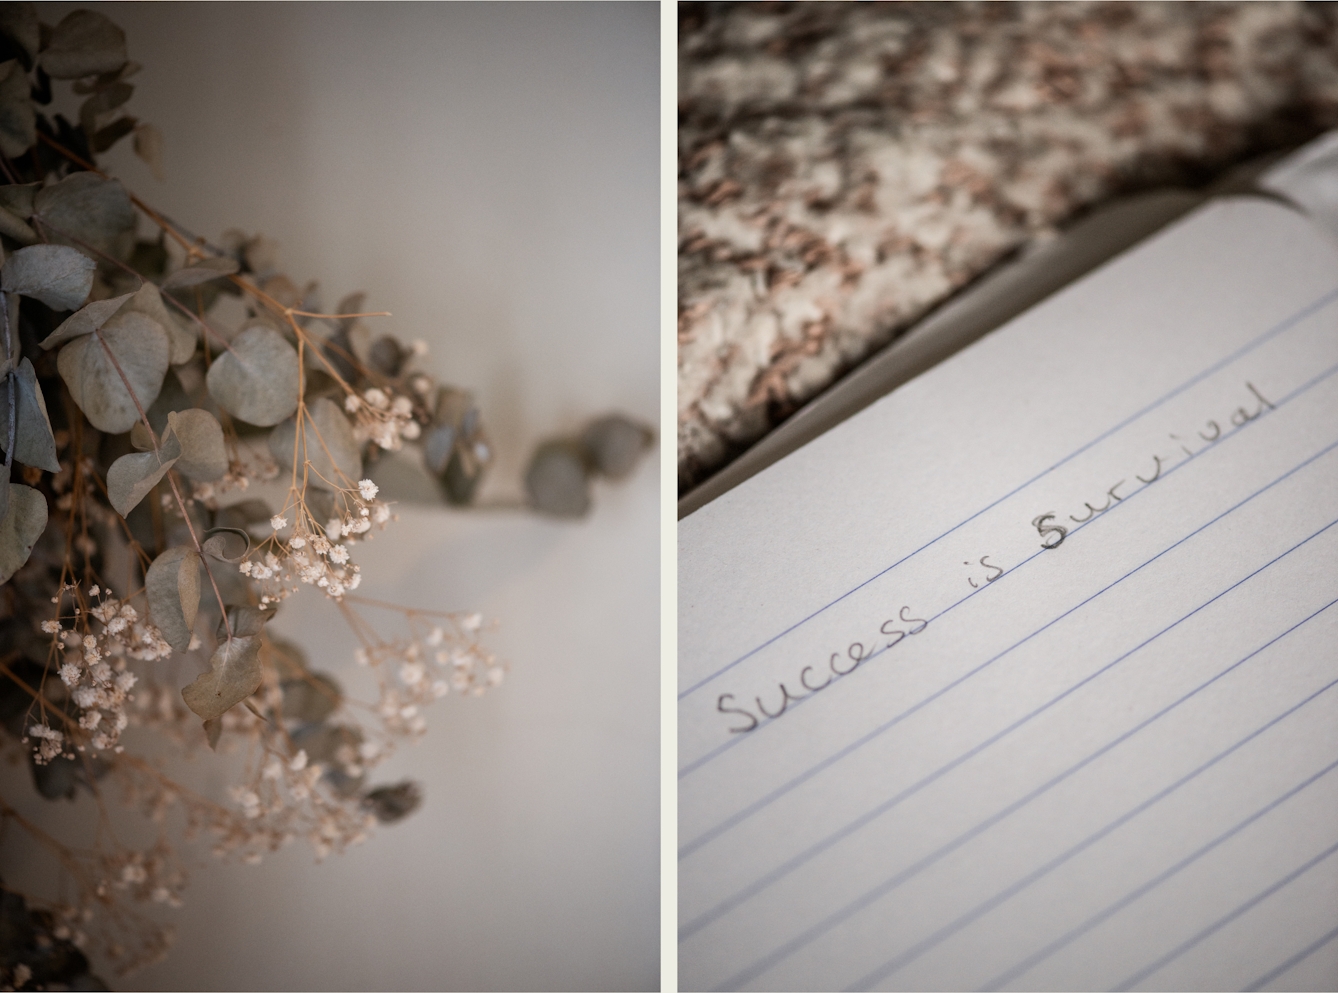 Photographic colour diptych. The image on the left shows several branches with small green leaves and small white flowers attached. They are on a white background. The image on the right shows a lined notebook - the first line reads 'success is survival', written in pencil. The letter 's' in survival is bolder than the rest of the text. 